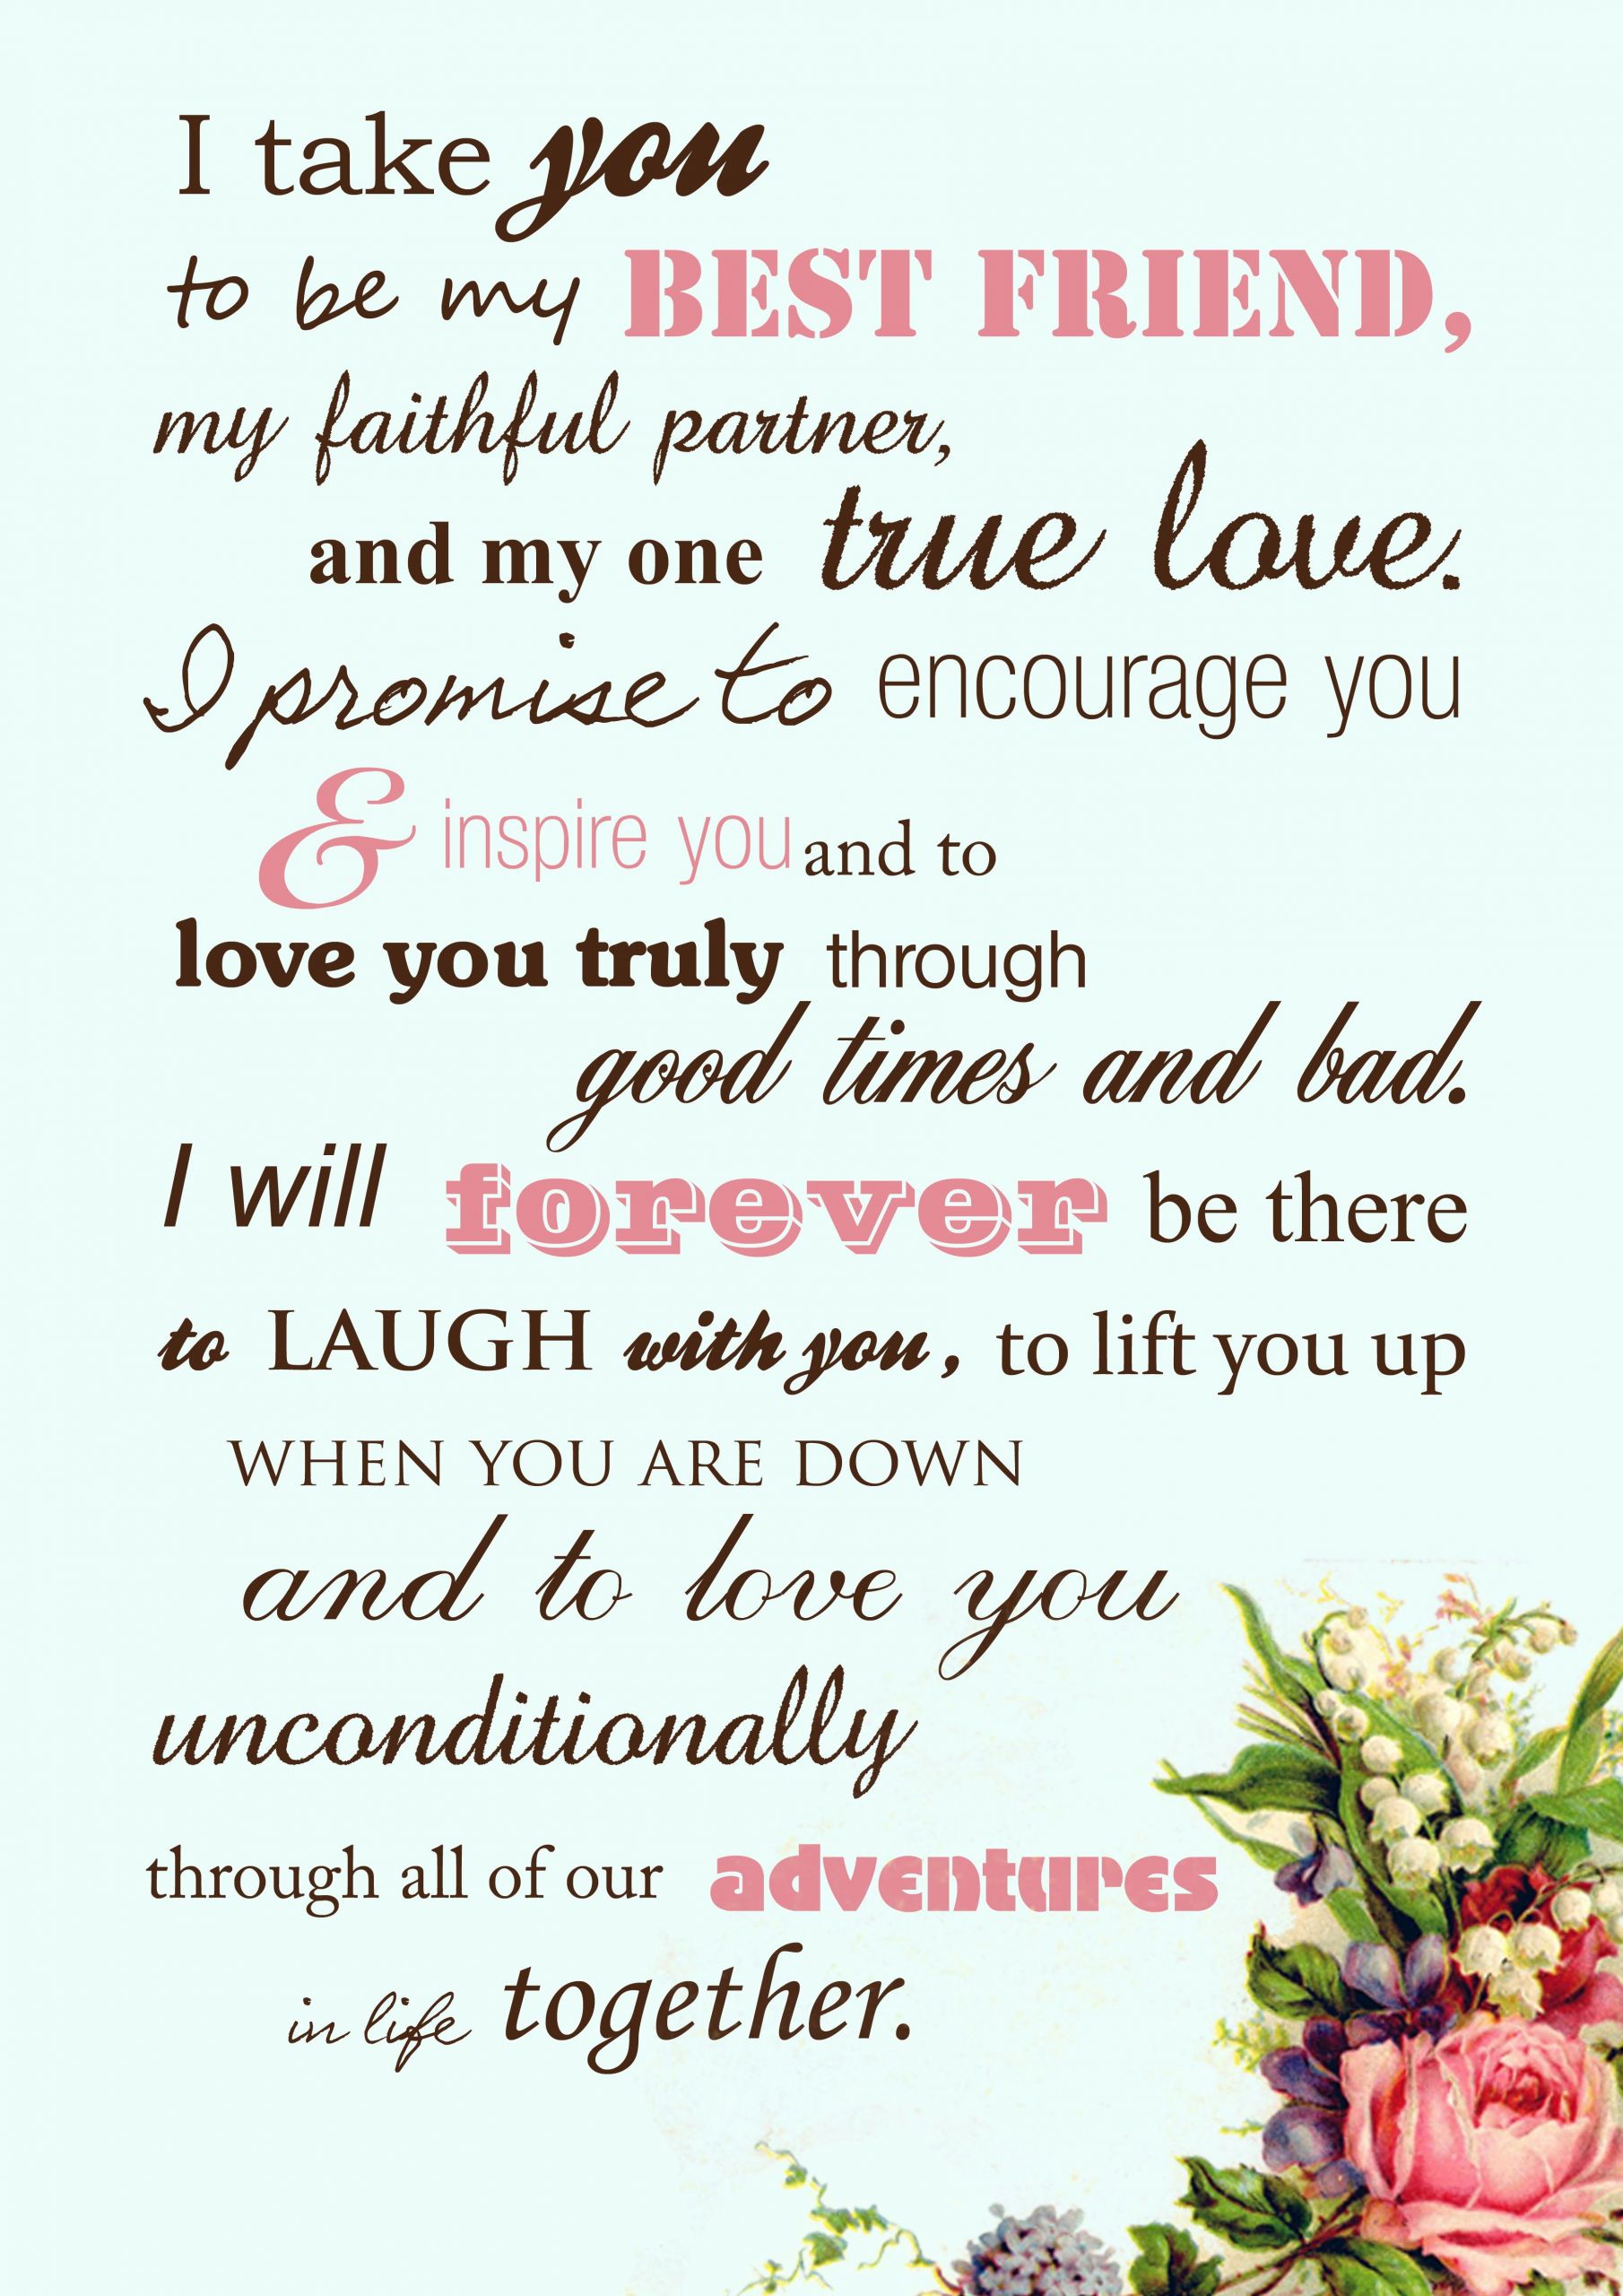 Sample Funny Wedding Vows
 Beautiful wedding vows instead of the traditional by the